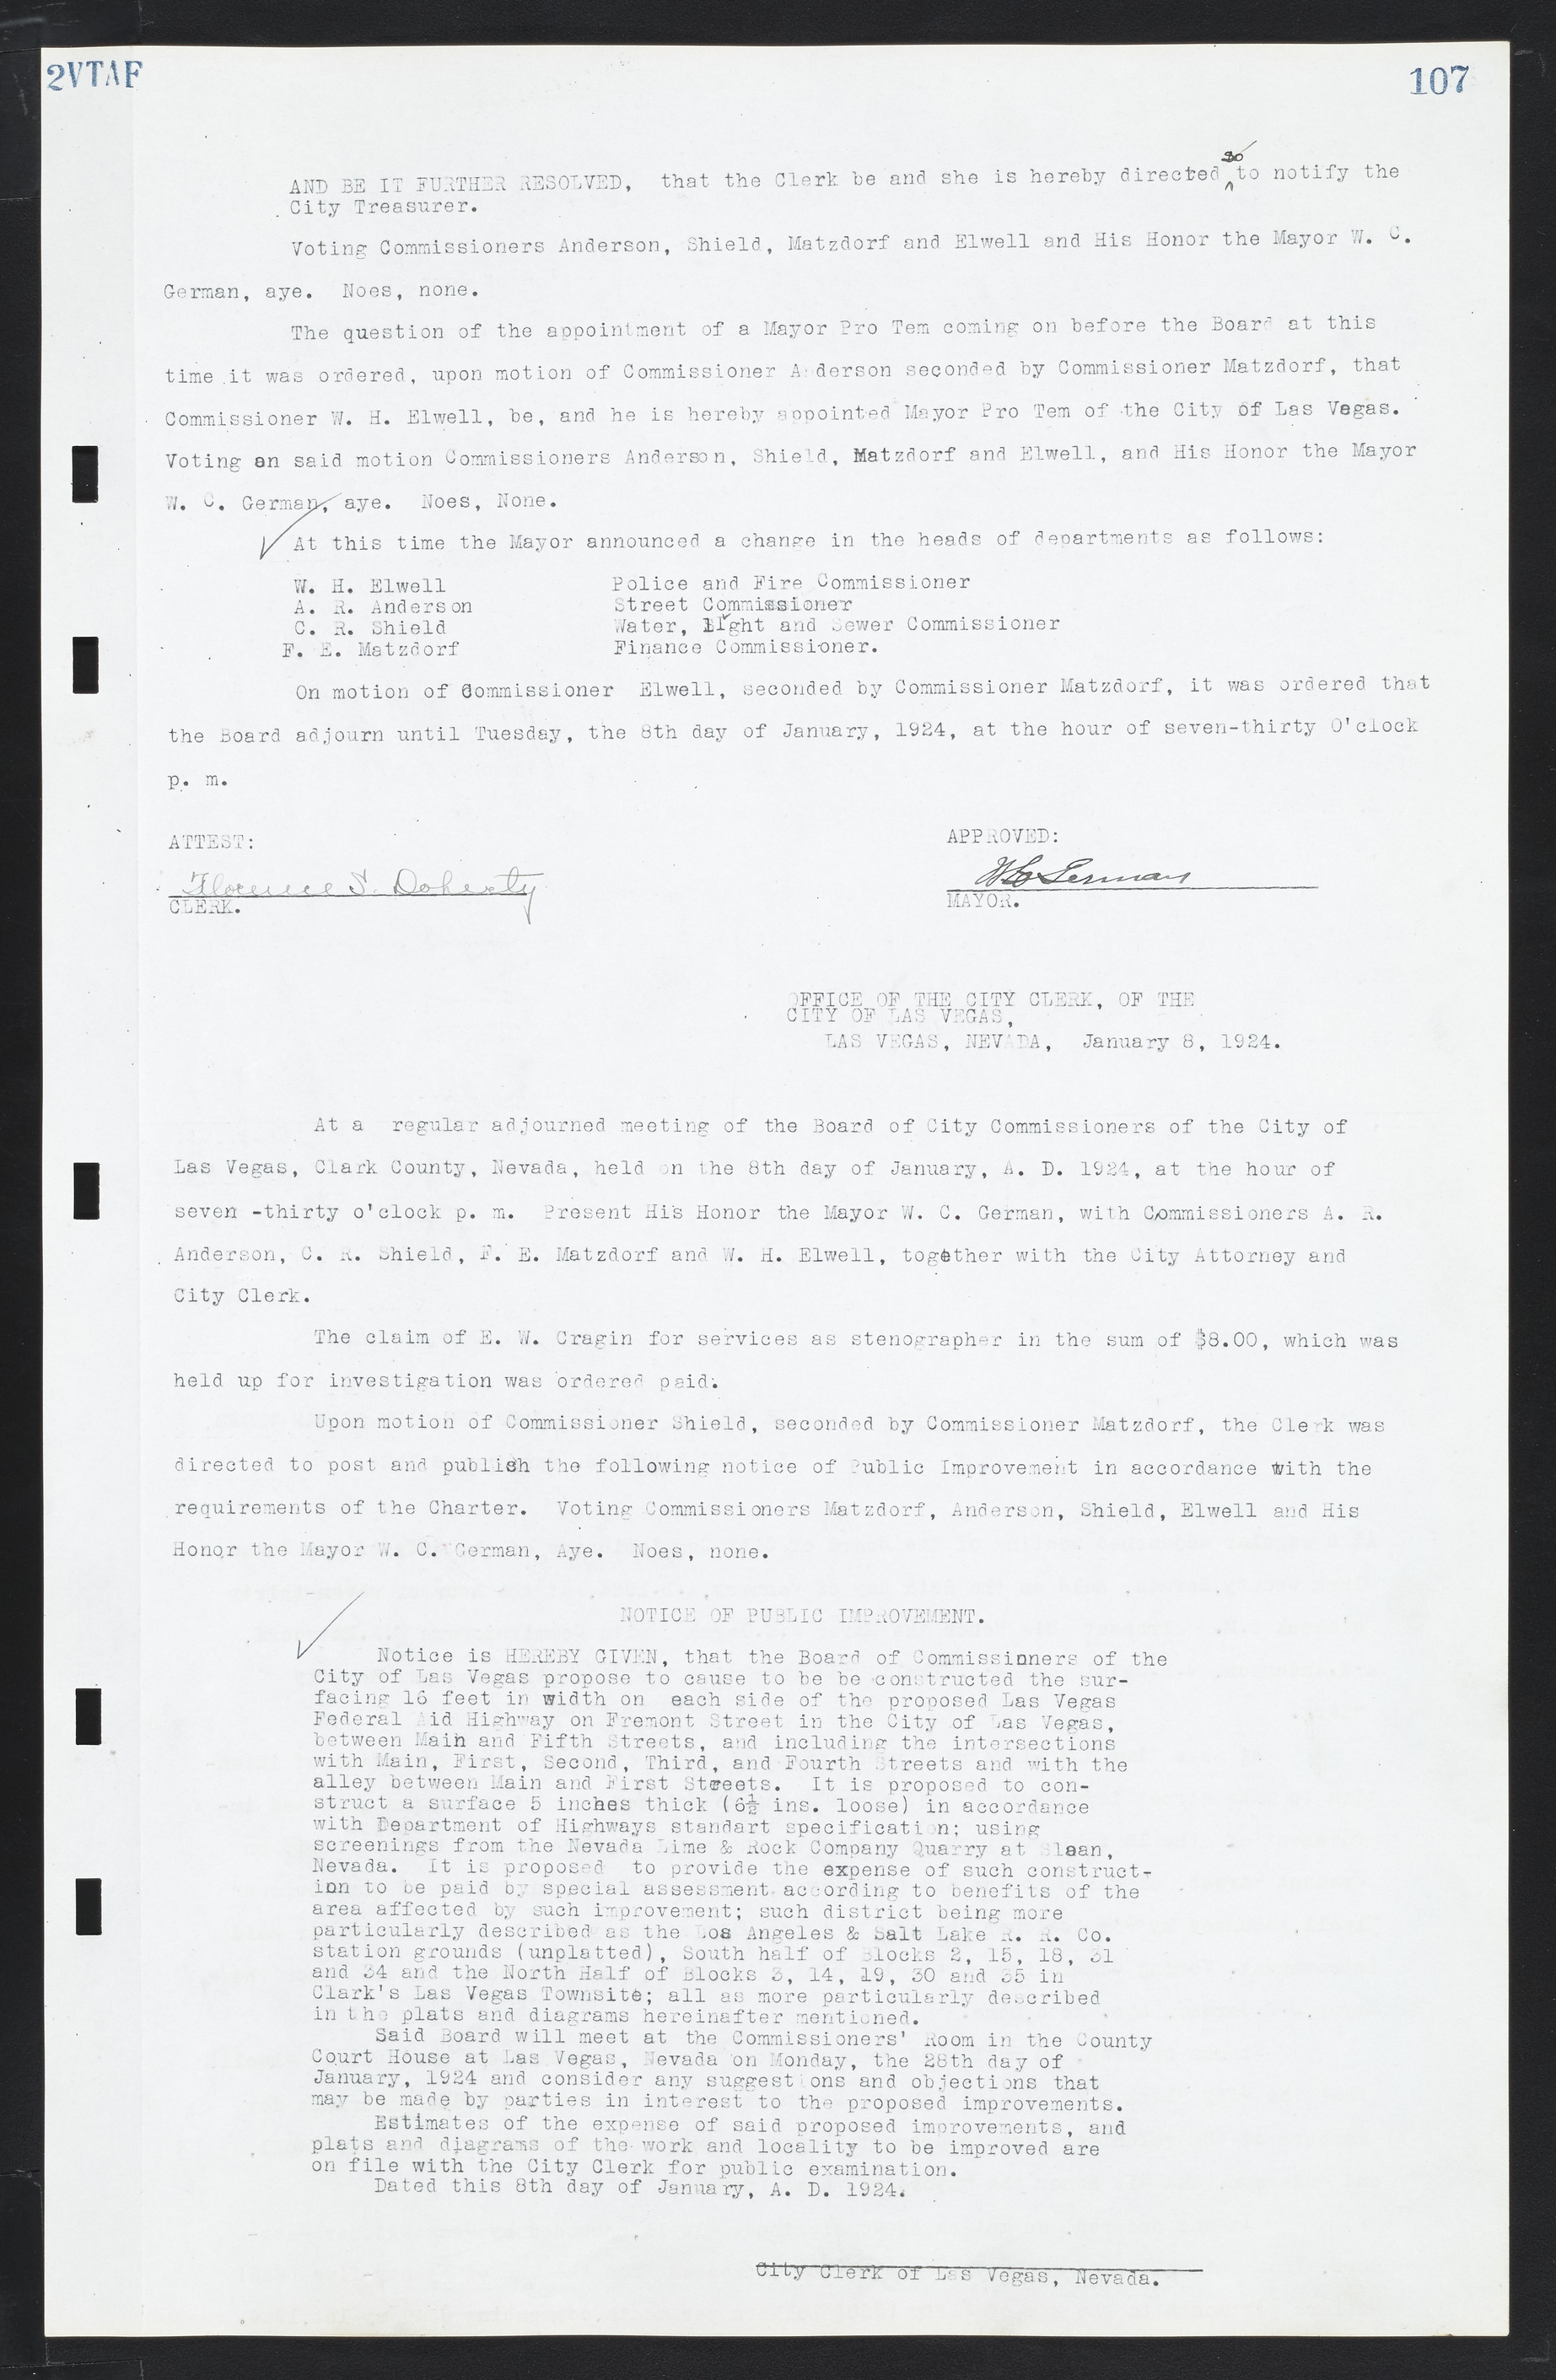 Las Vegas City Commission Minutes, March 1, 1922 to May 10, 1929, lvc000002-114